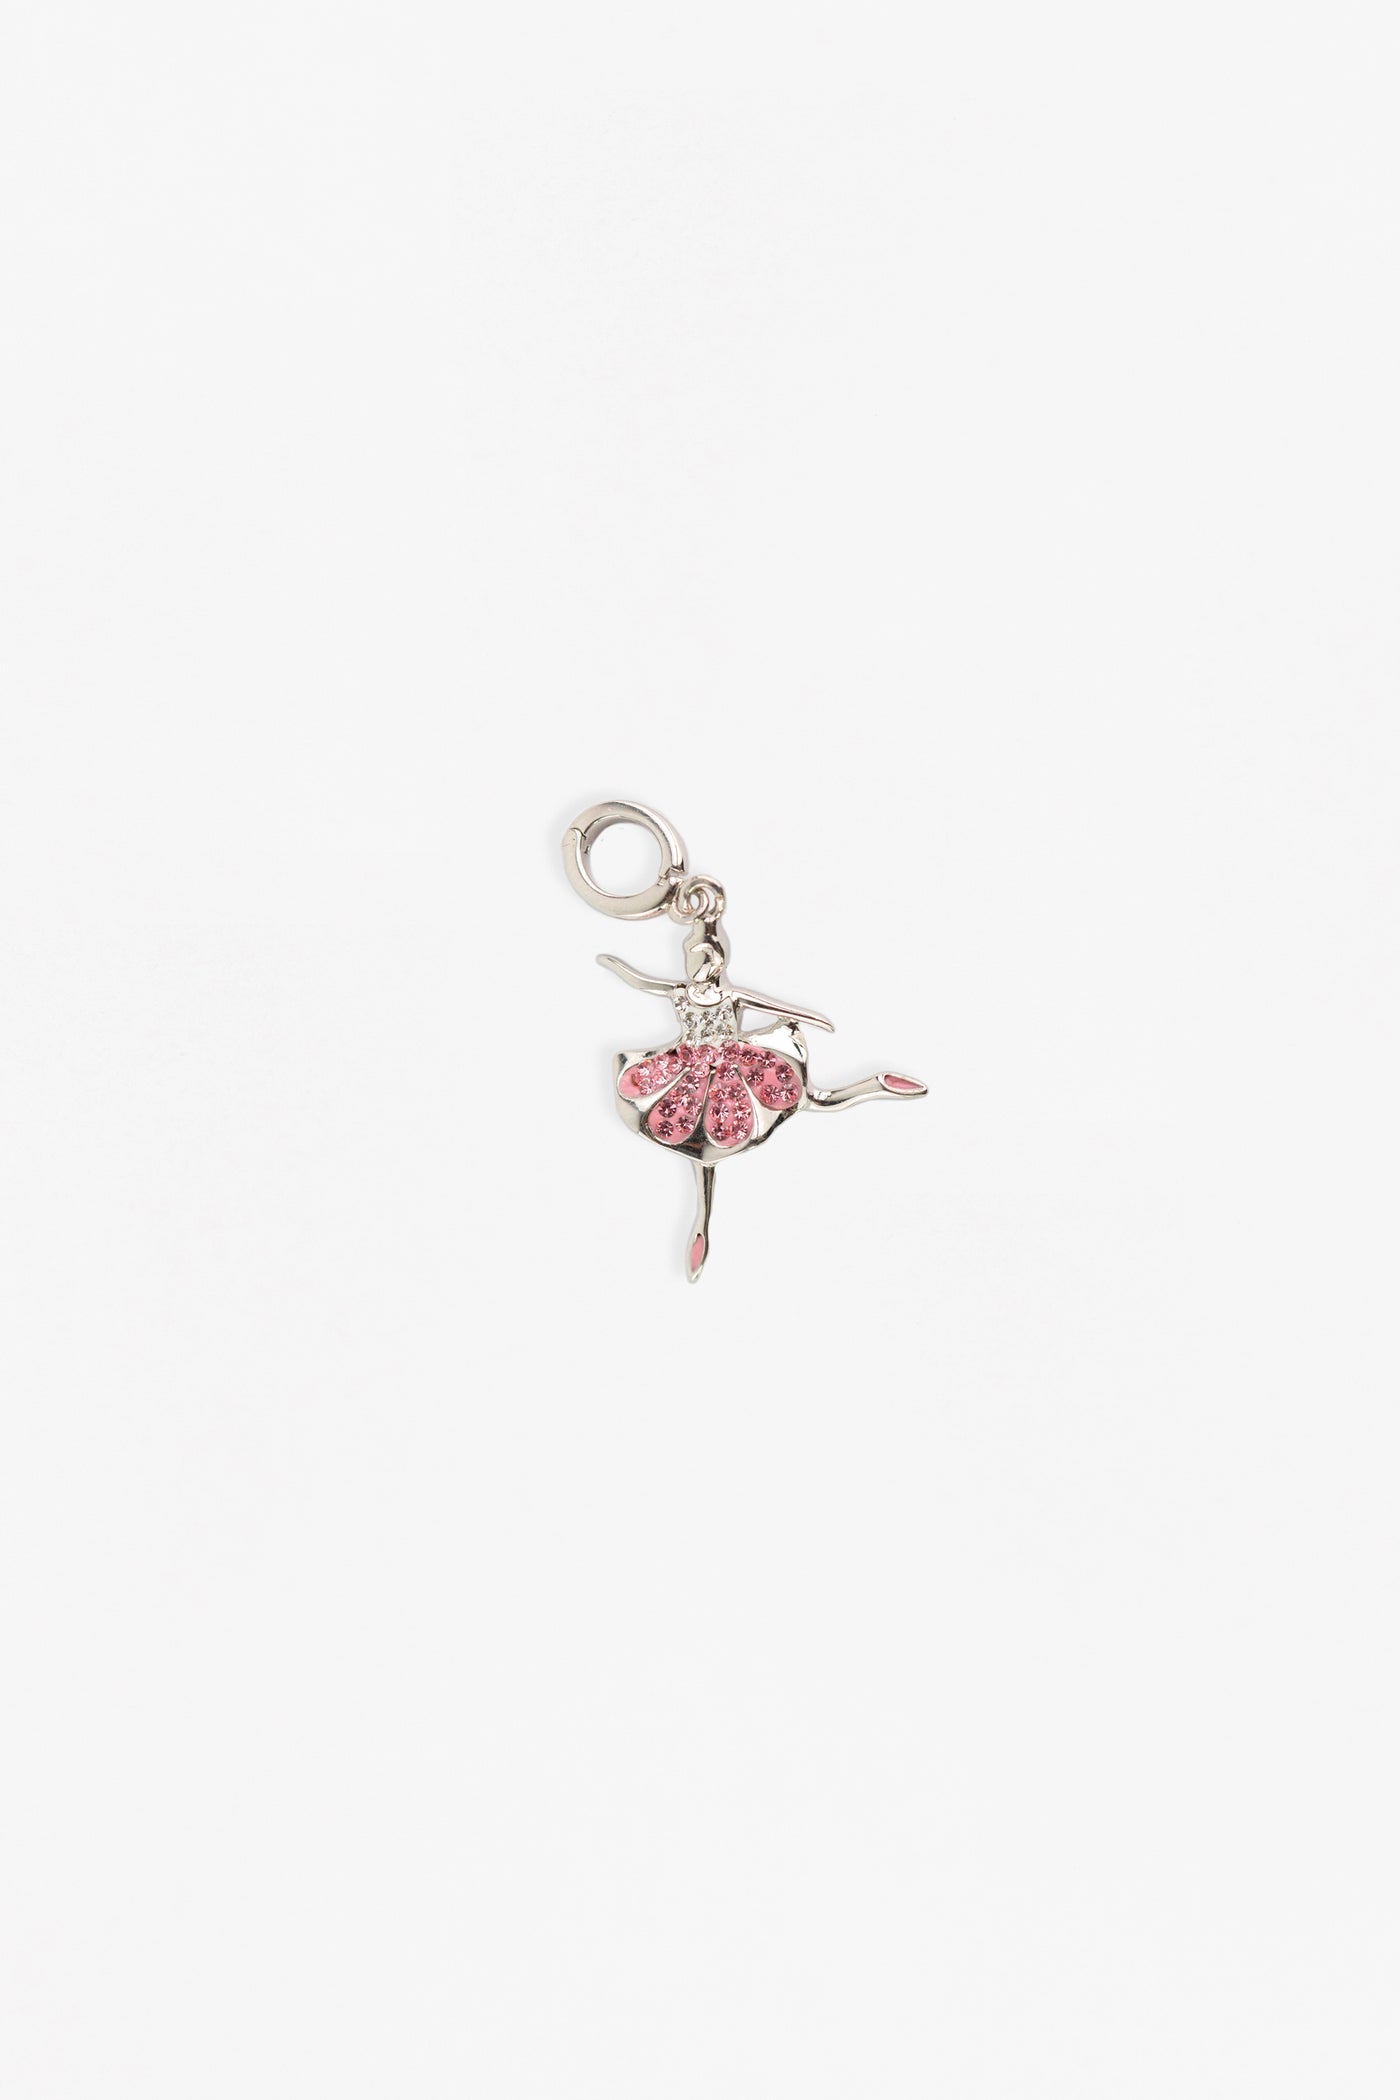 Ballerina In Rose Pink Crystal Dress (Back Attitude Pose) Sterling Silver Charm | Annie and Sisters